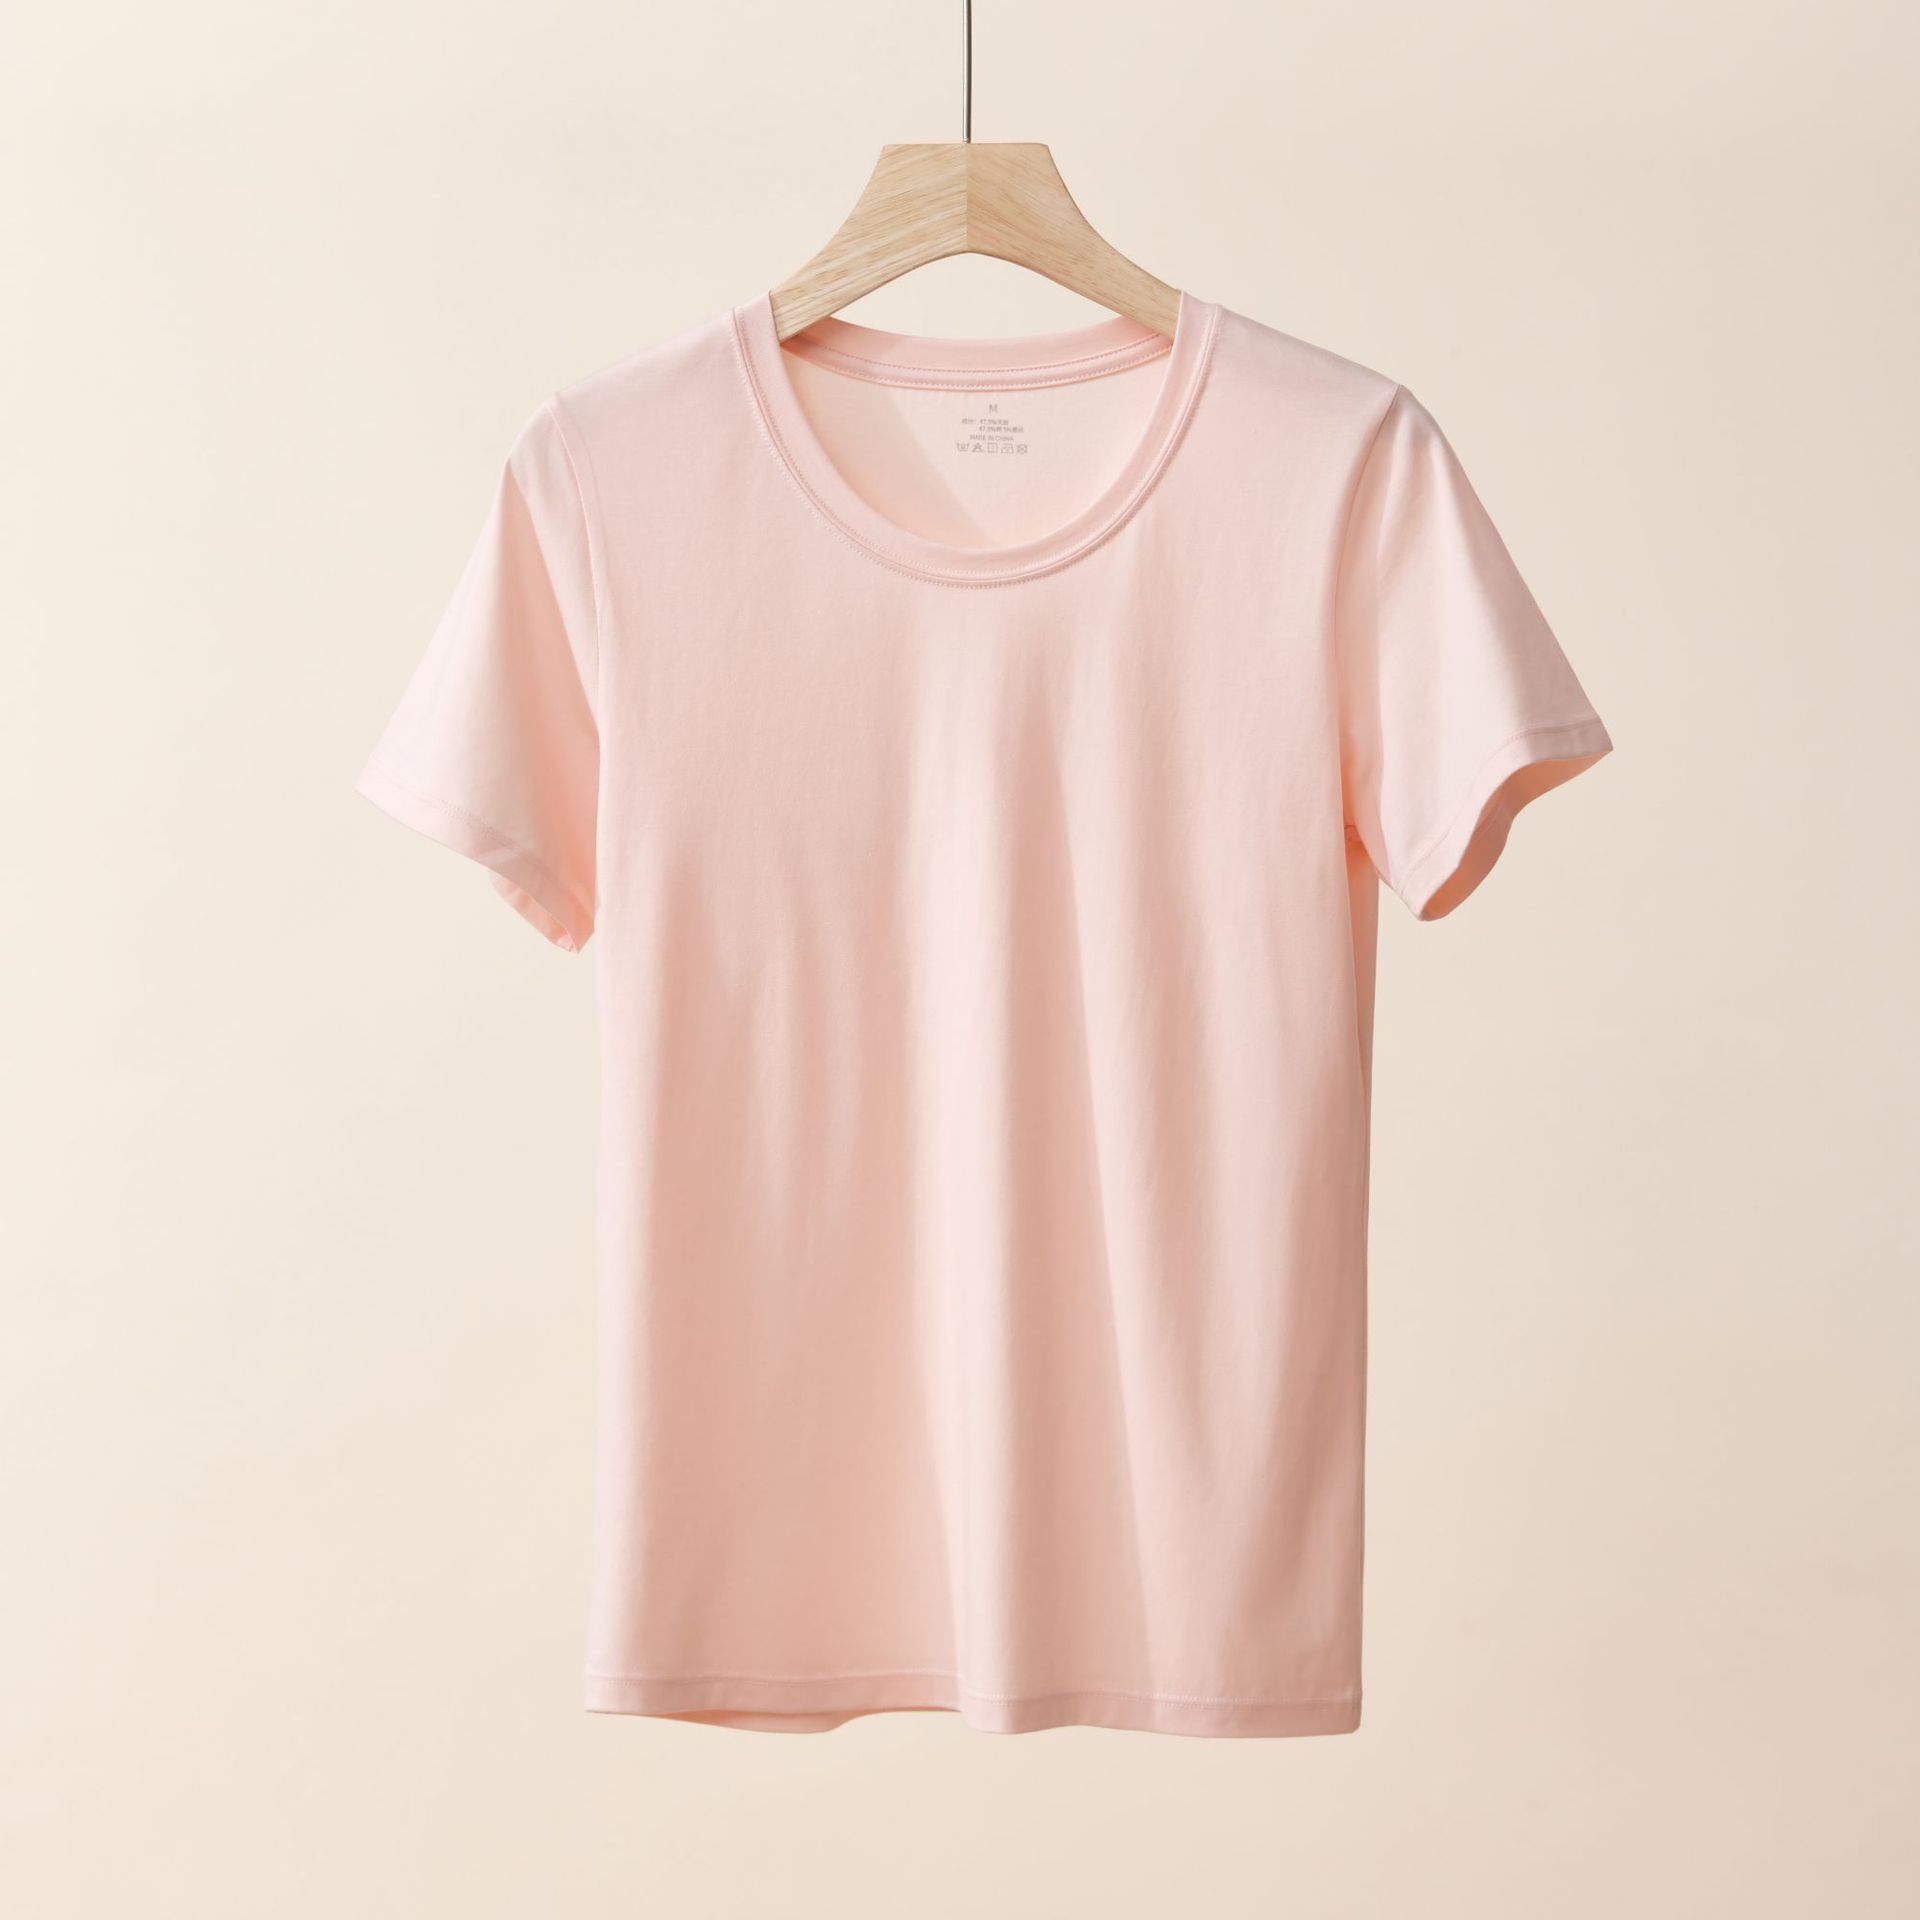 Tencel Antibacterial Short-Sleeved T-shirt Women's Summer Loose Top Women's Bottoming Shirt Casual round Neck Pure Color Cotton Short-Sleeved Women's